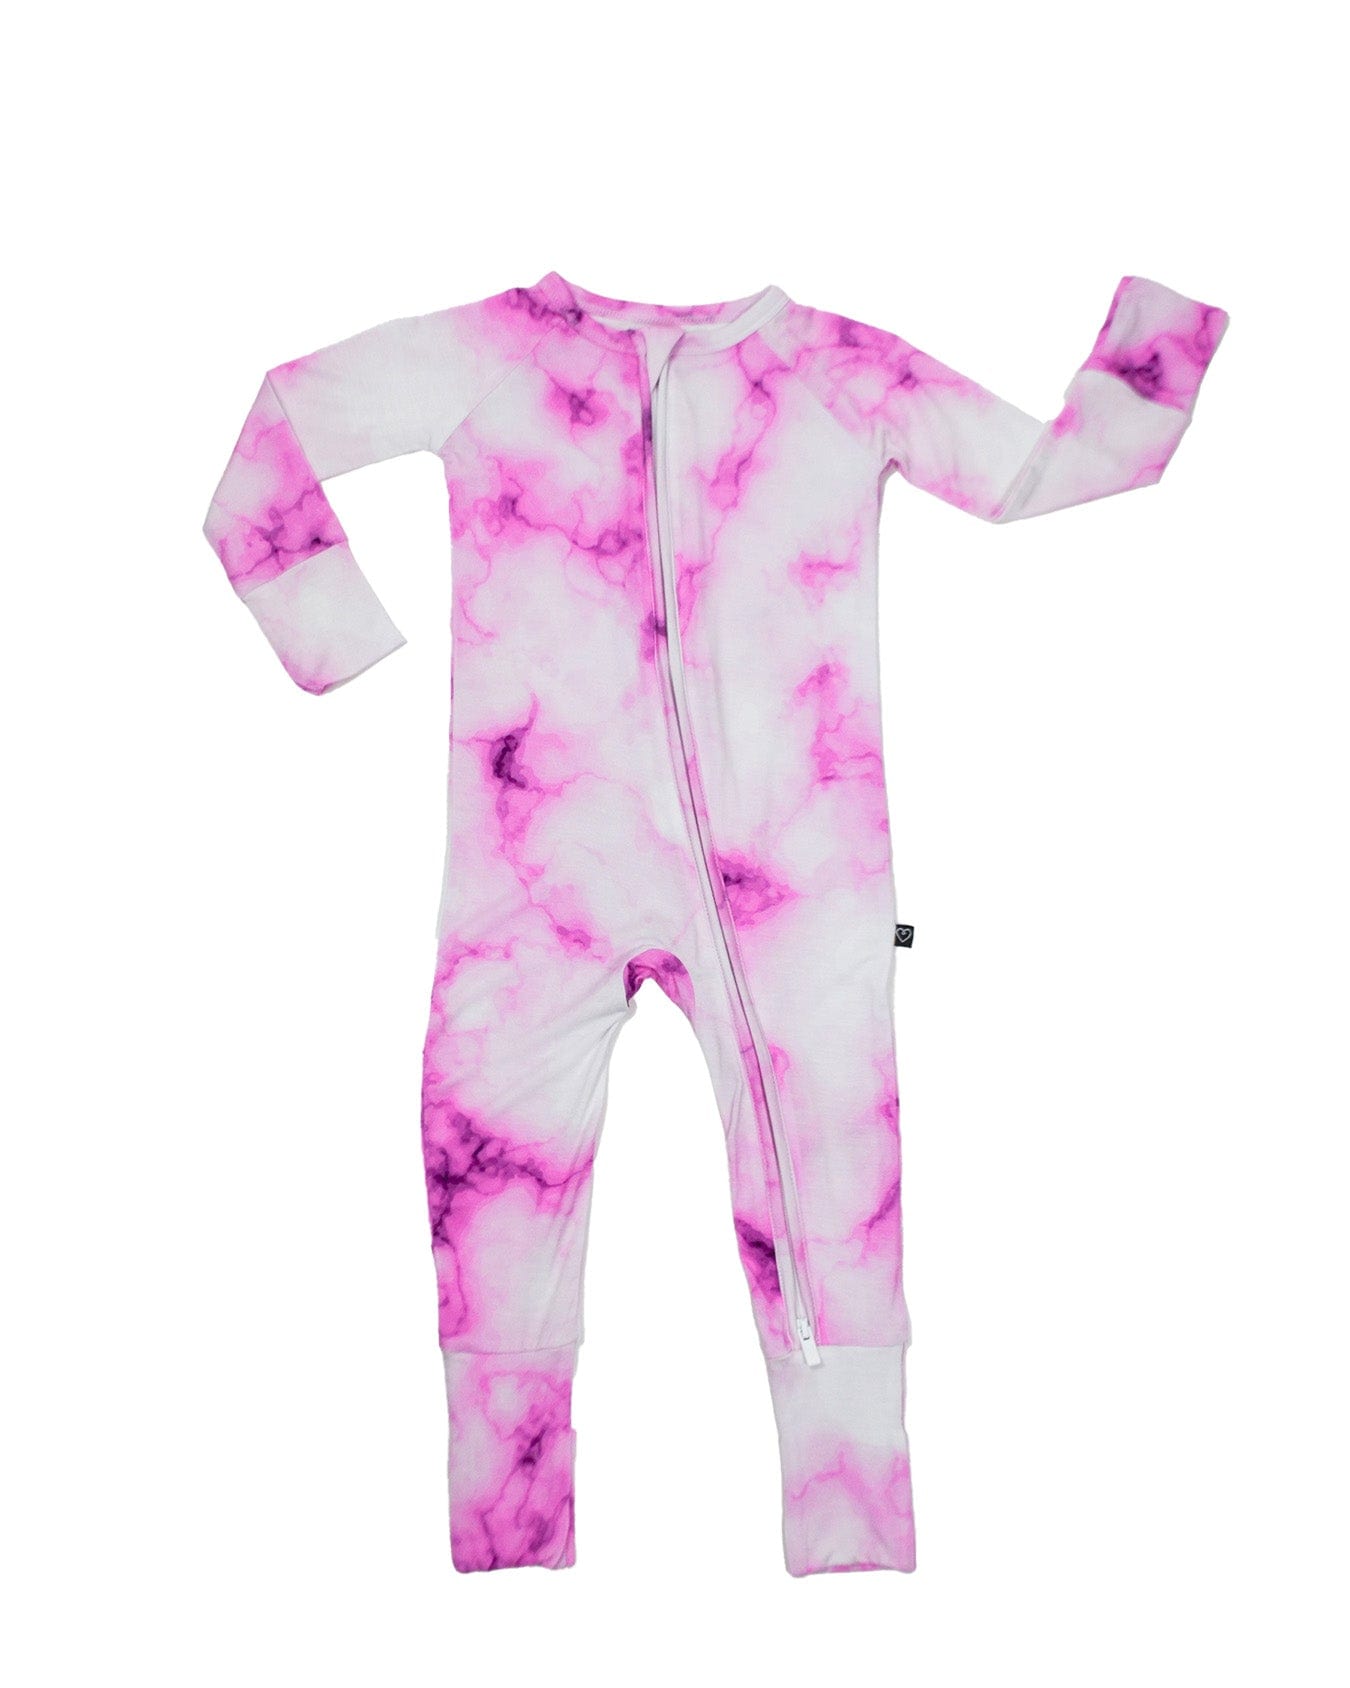 Pink Marble 'Poppy': The Convertible Romper